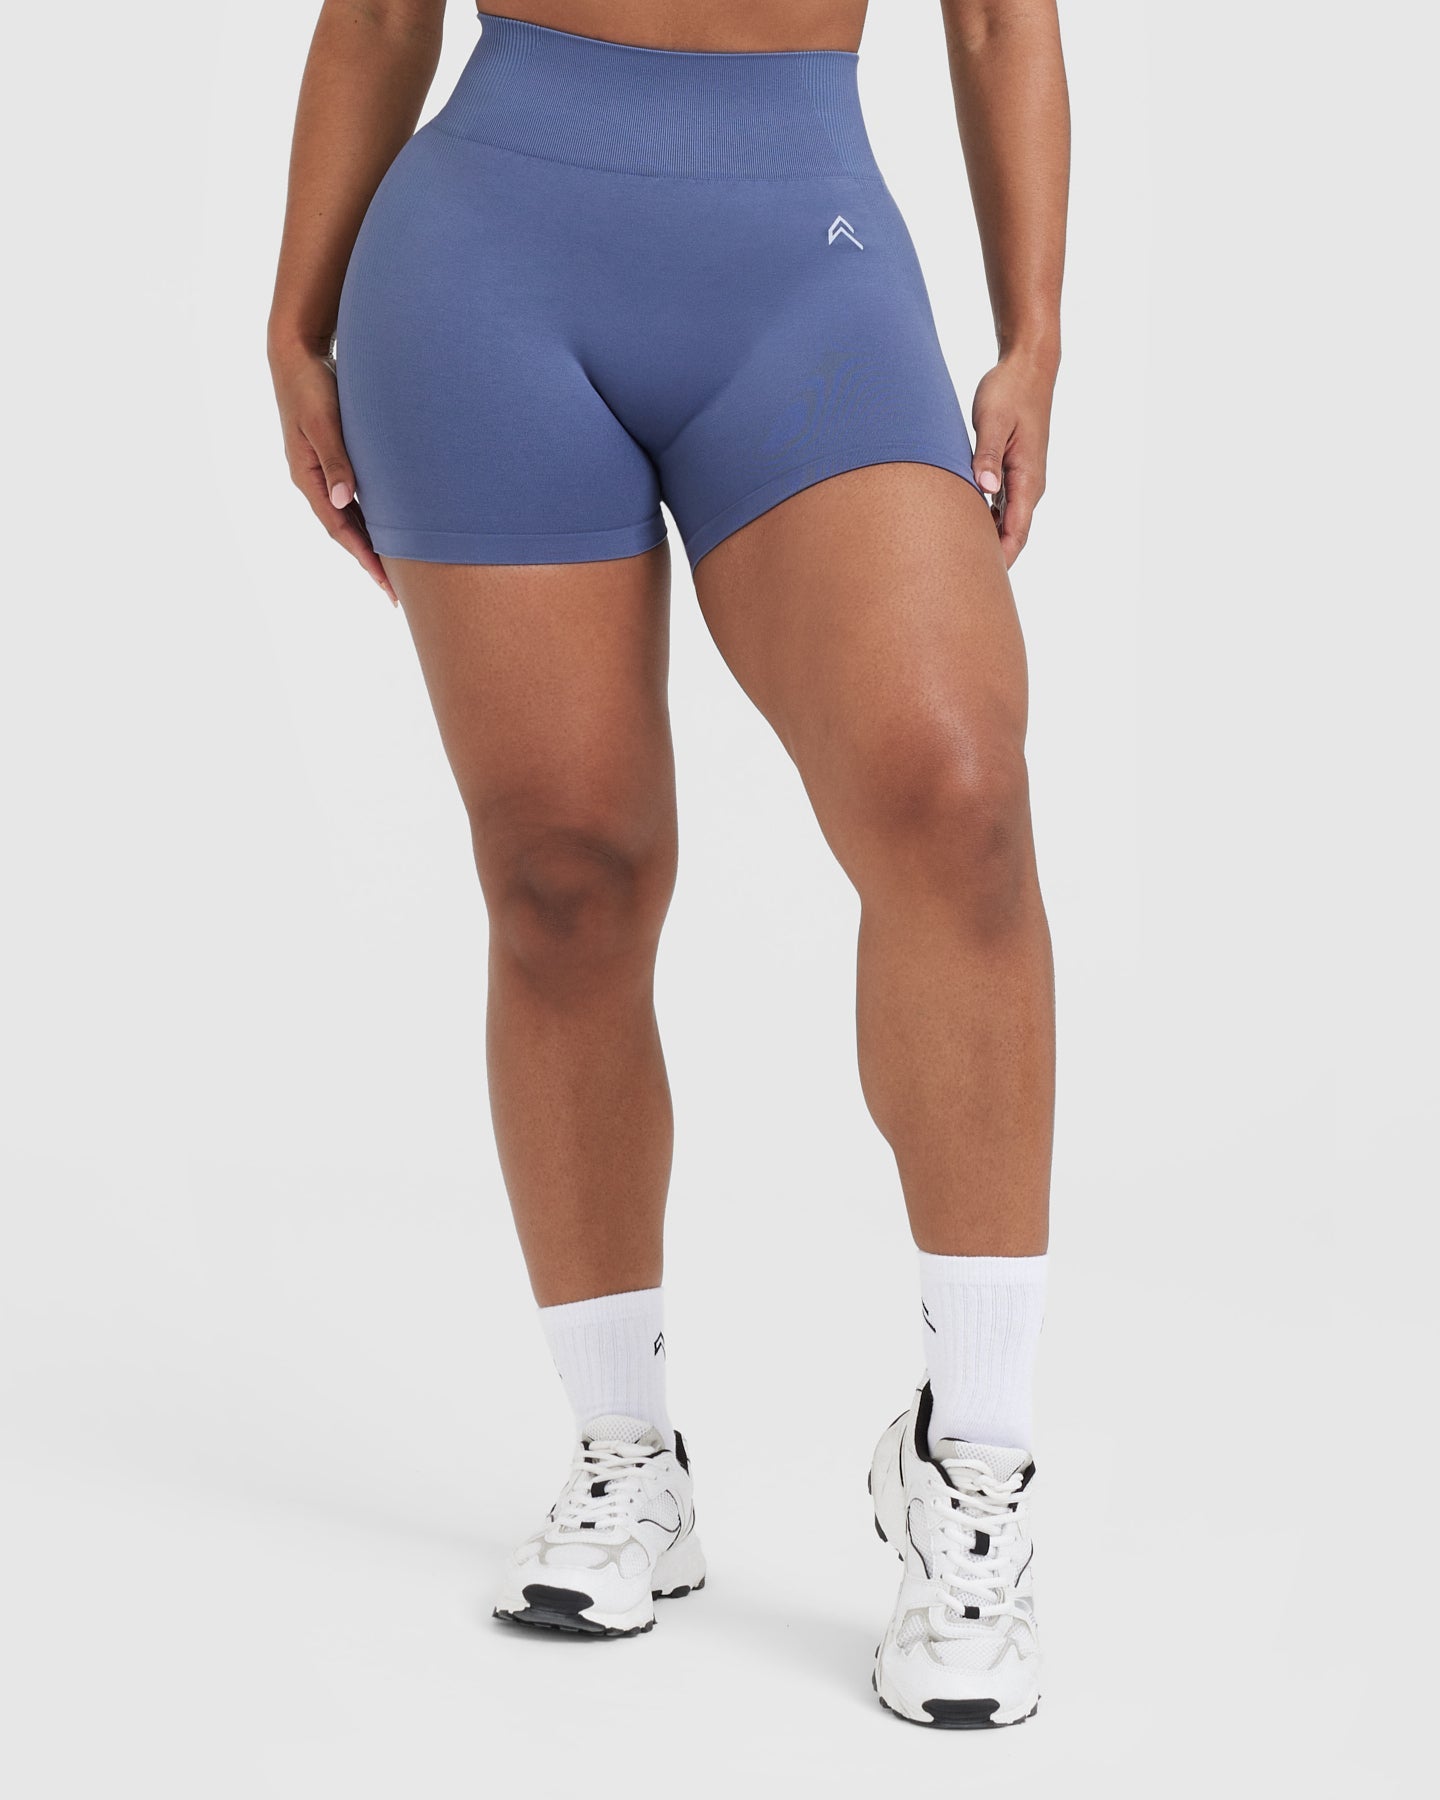 Classic Seamless 2.0 Booty Shorts Slate Blue Marl | Oner Active US